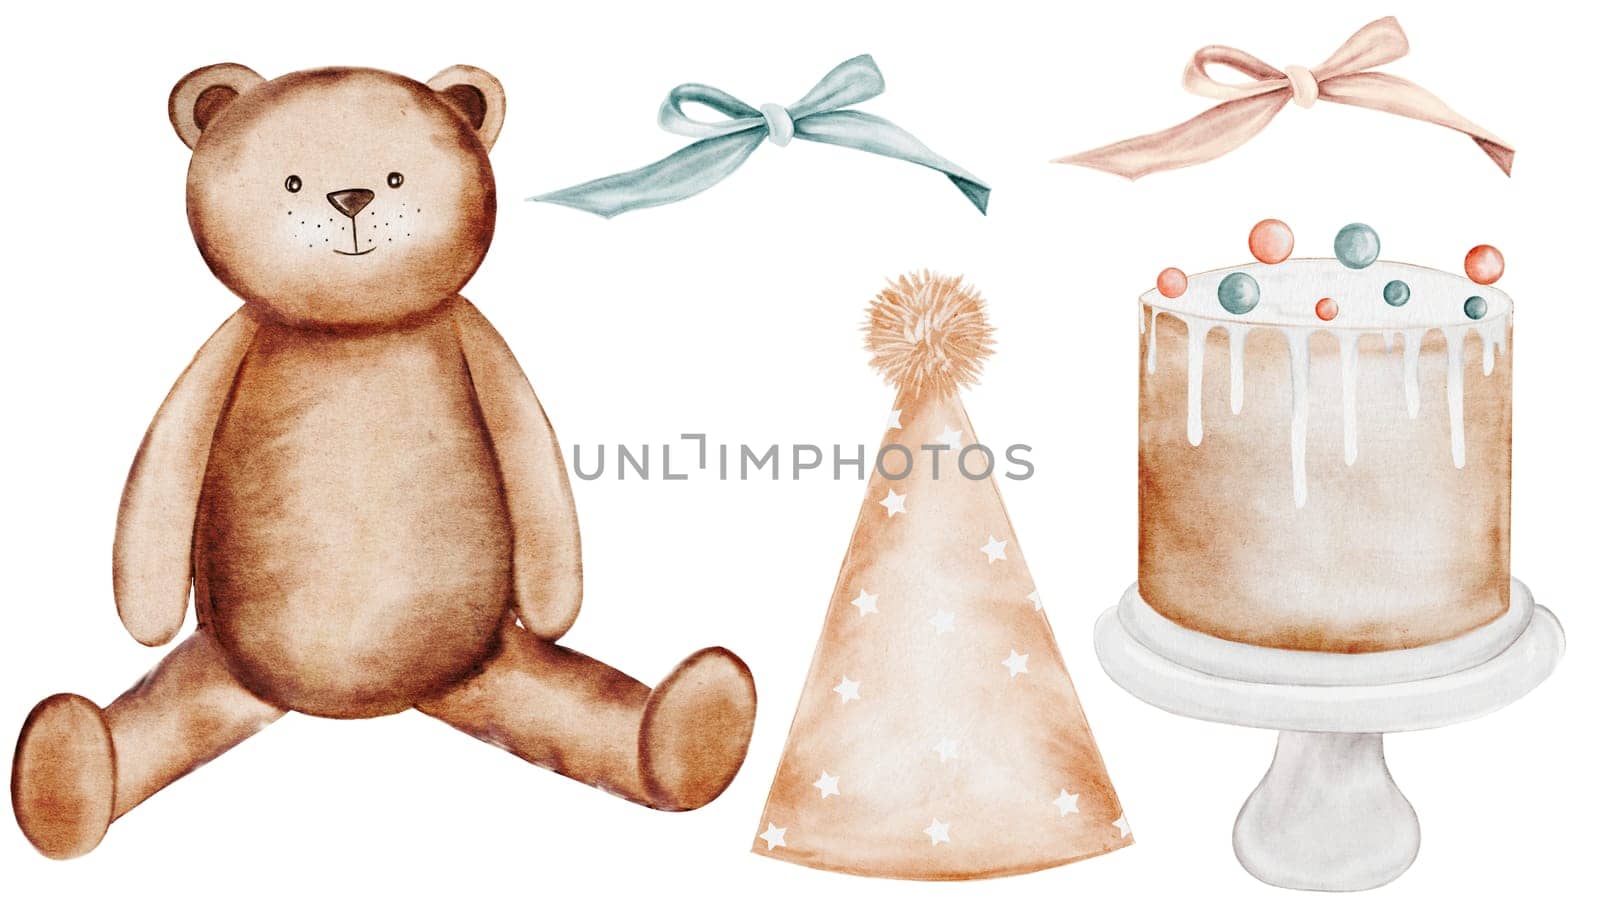 Happy Birthday Watercolor set. Hand drawn festive elements teddy bear, cake on stand, cap and bows. Clip art isolated on white background in neutral colors. Ideal for cards, invitations and birthday and baby shower decorations. Illustration for party. High quality illustration